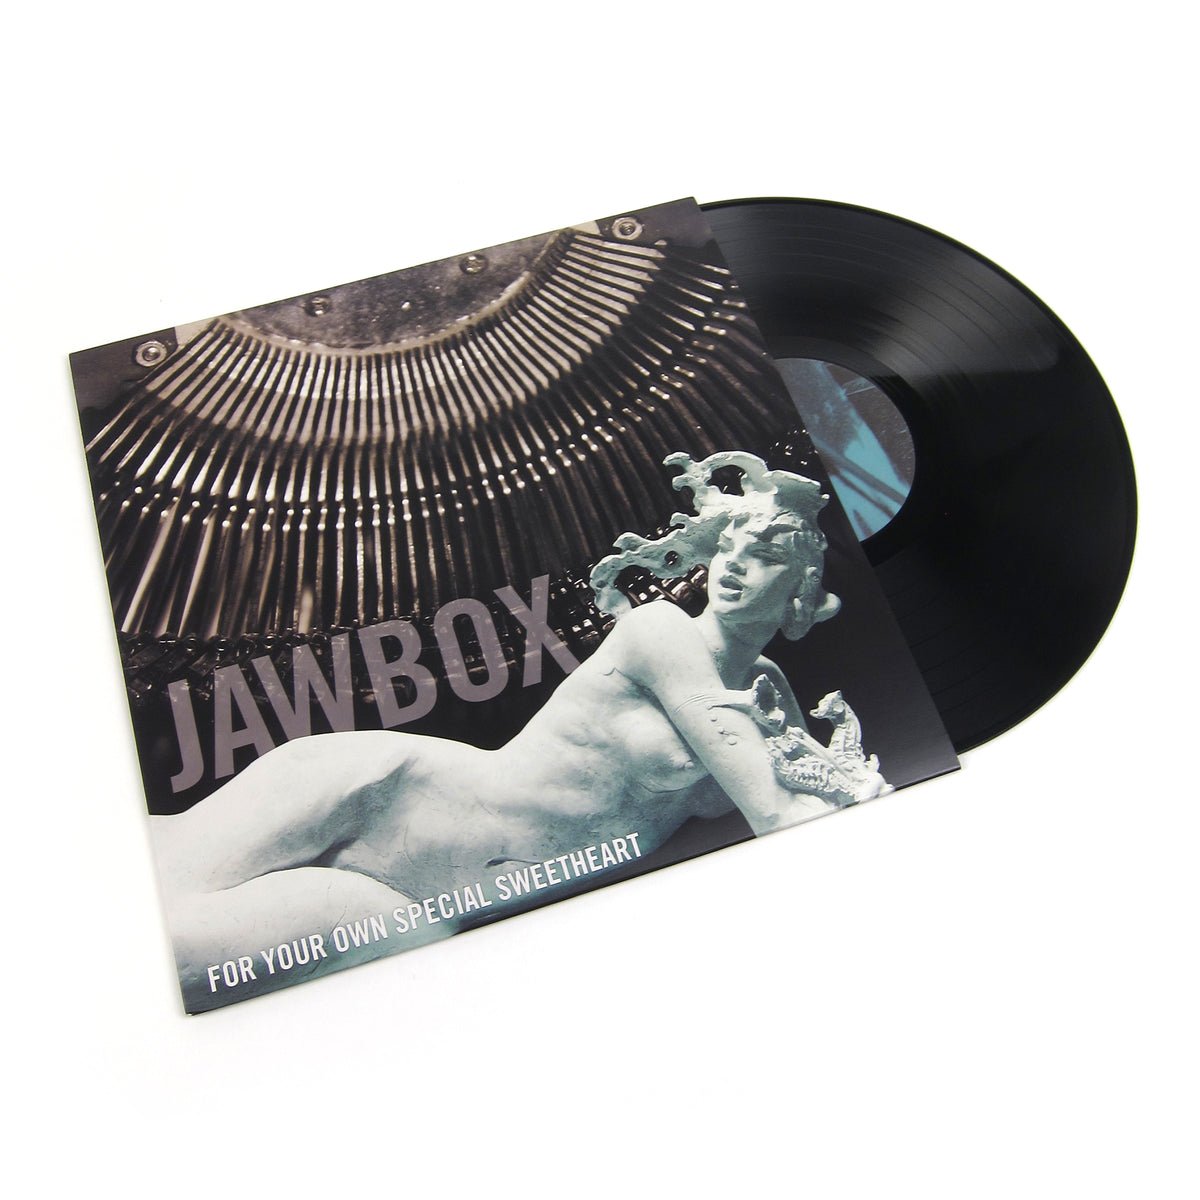 Jawbox: For Your Own Special Sweetheart: Black Vinyl - Steadfast Records